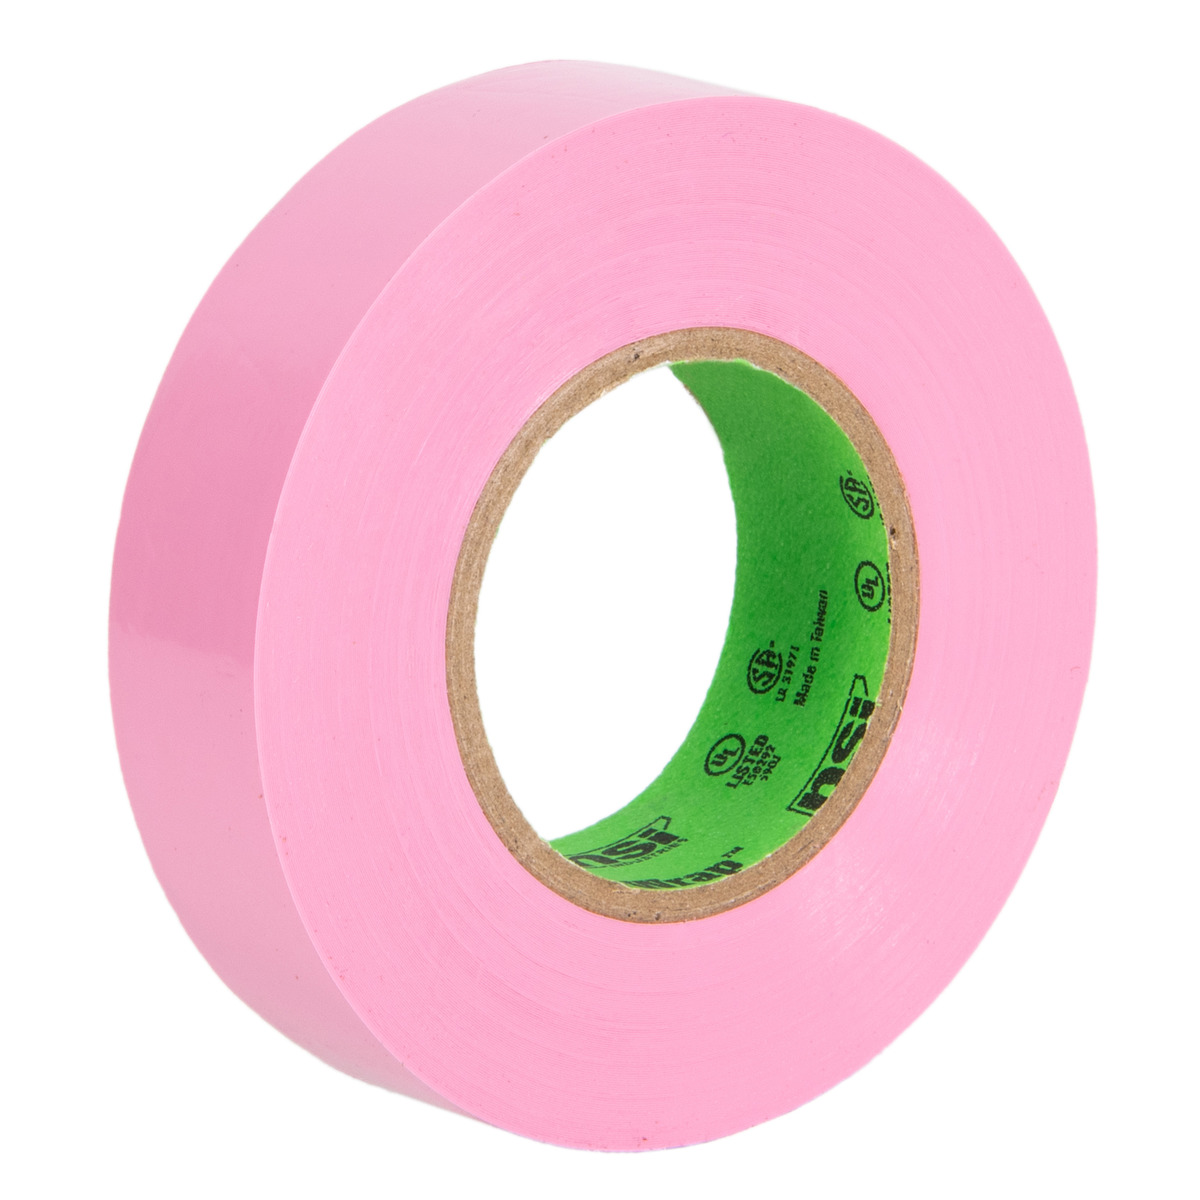 JVCC E-Tape Colored Electrical Tape [7 mils thick]: 3/4 in. x 66 ft. (Pink)